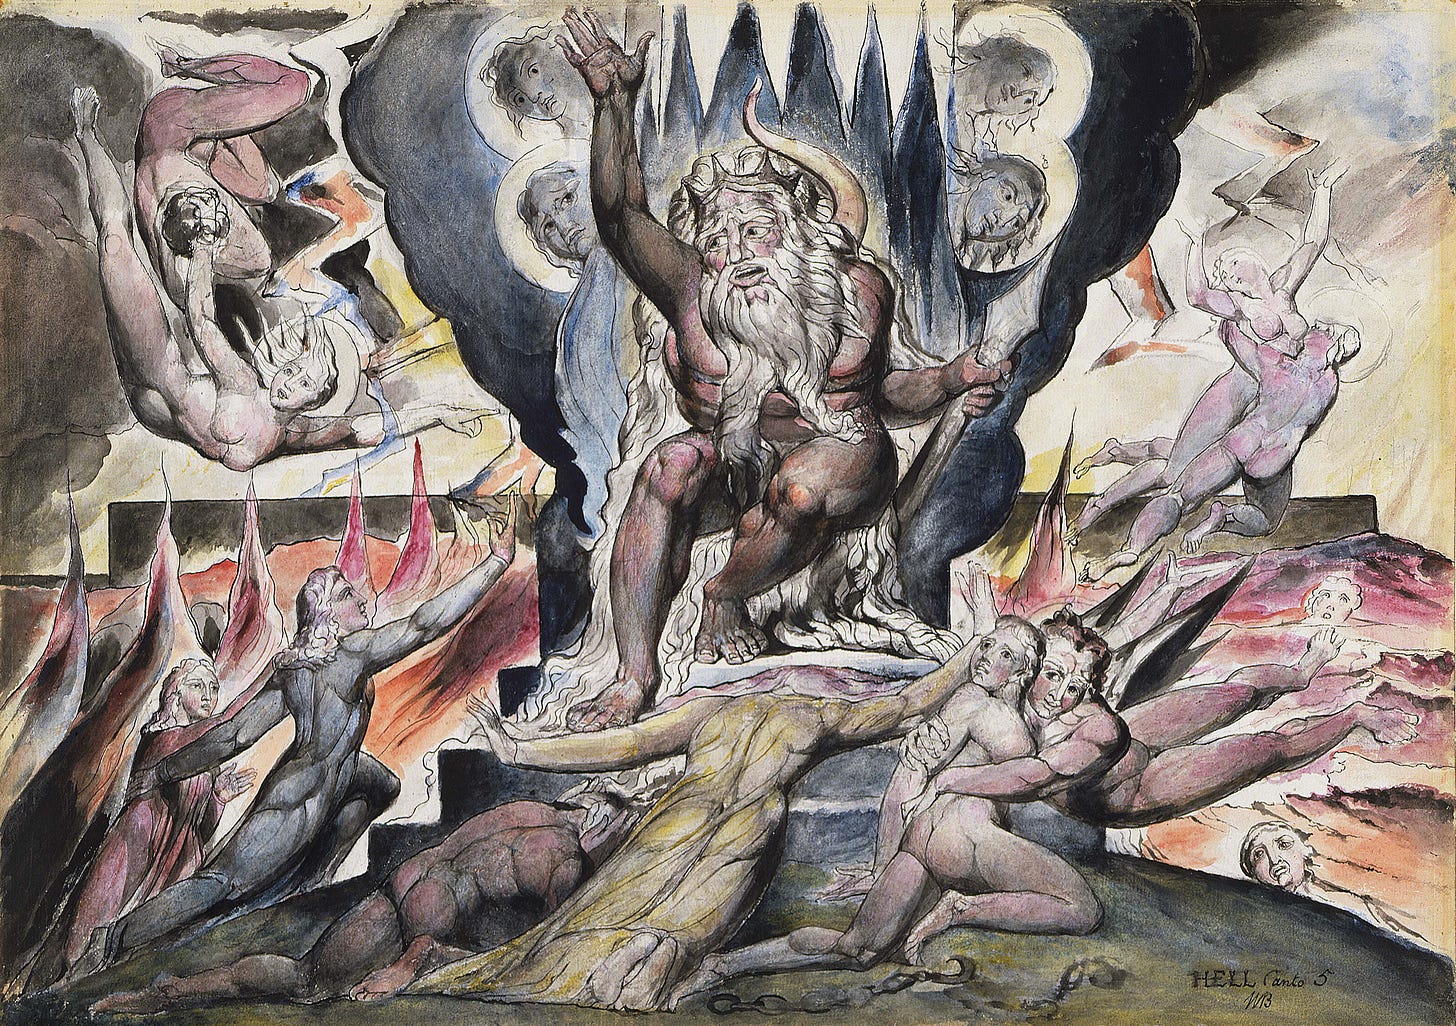 A photo of a watercolour painting, over an outline in pencil and chalk. A fat man with a long white beard and a crown, or possibly horns, is enthroned on a jagged black seat. Four haloed angels peek out from behind him, and multiple figures cringe before him, including one couple clinging to one another, and a woman prostate, face down directly in front of him. Behind them the landscape is red, dark, and stormy. 